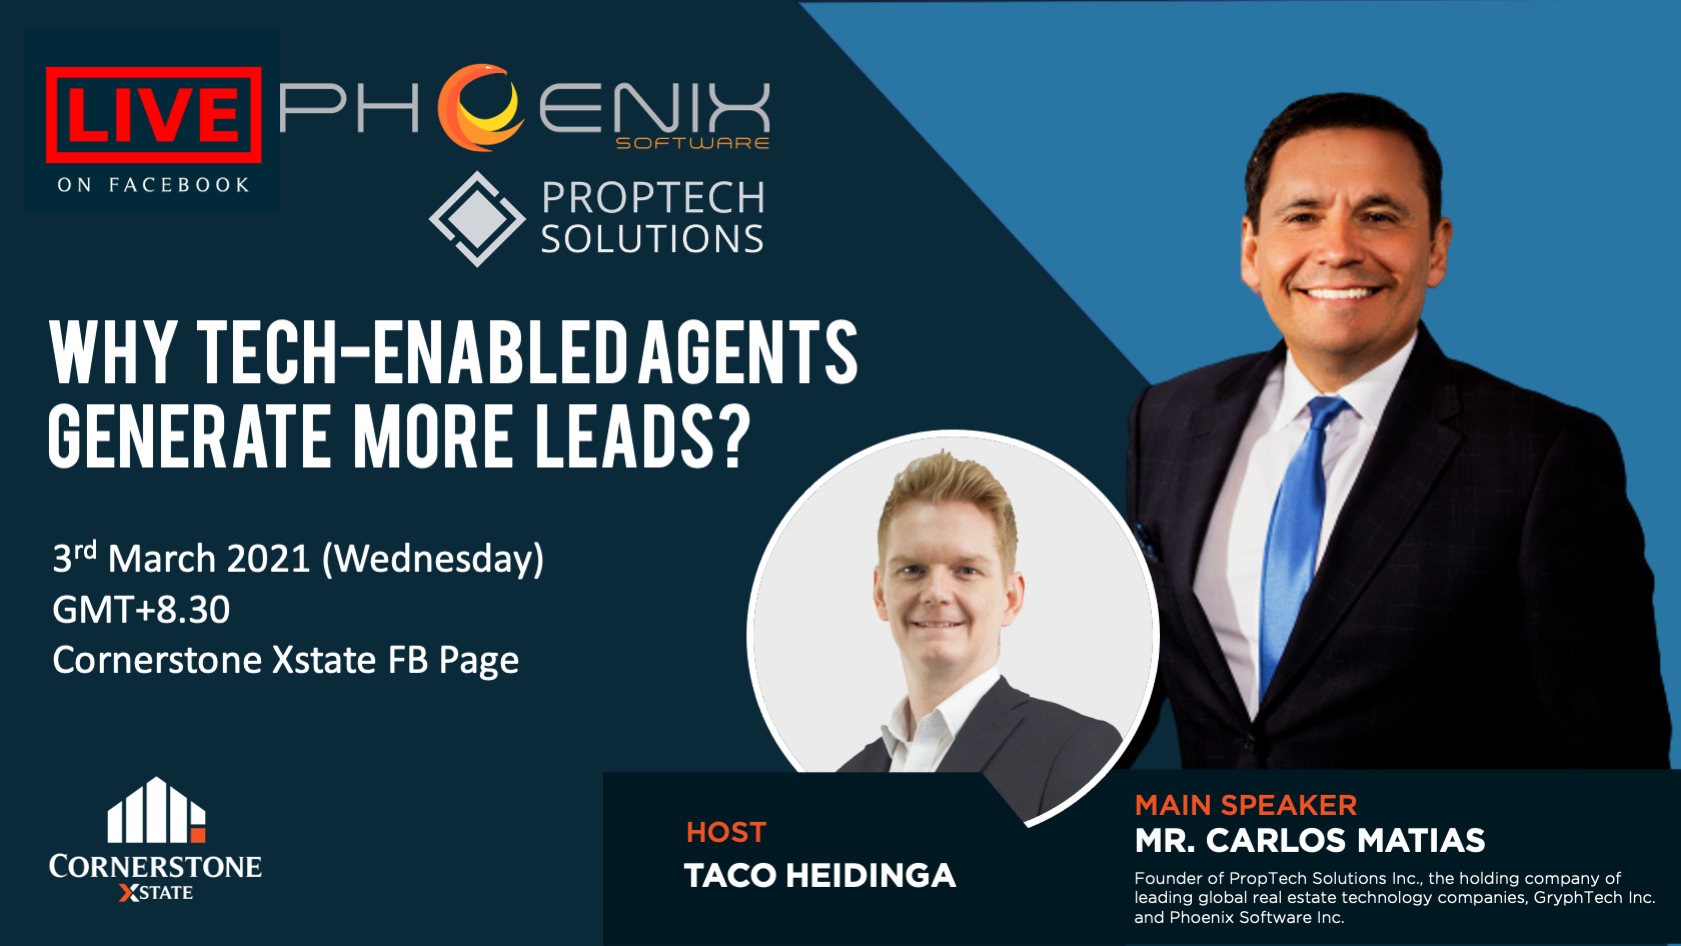 Why Tech-Enabled Agents Generate More Leads?